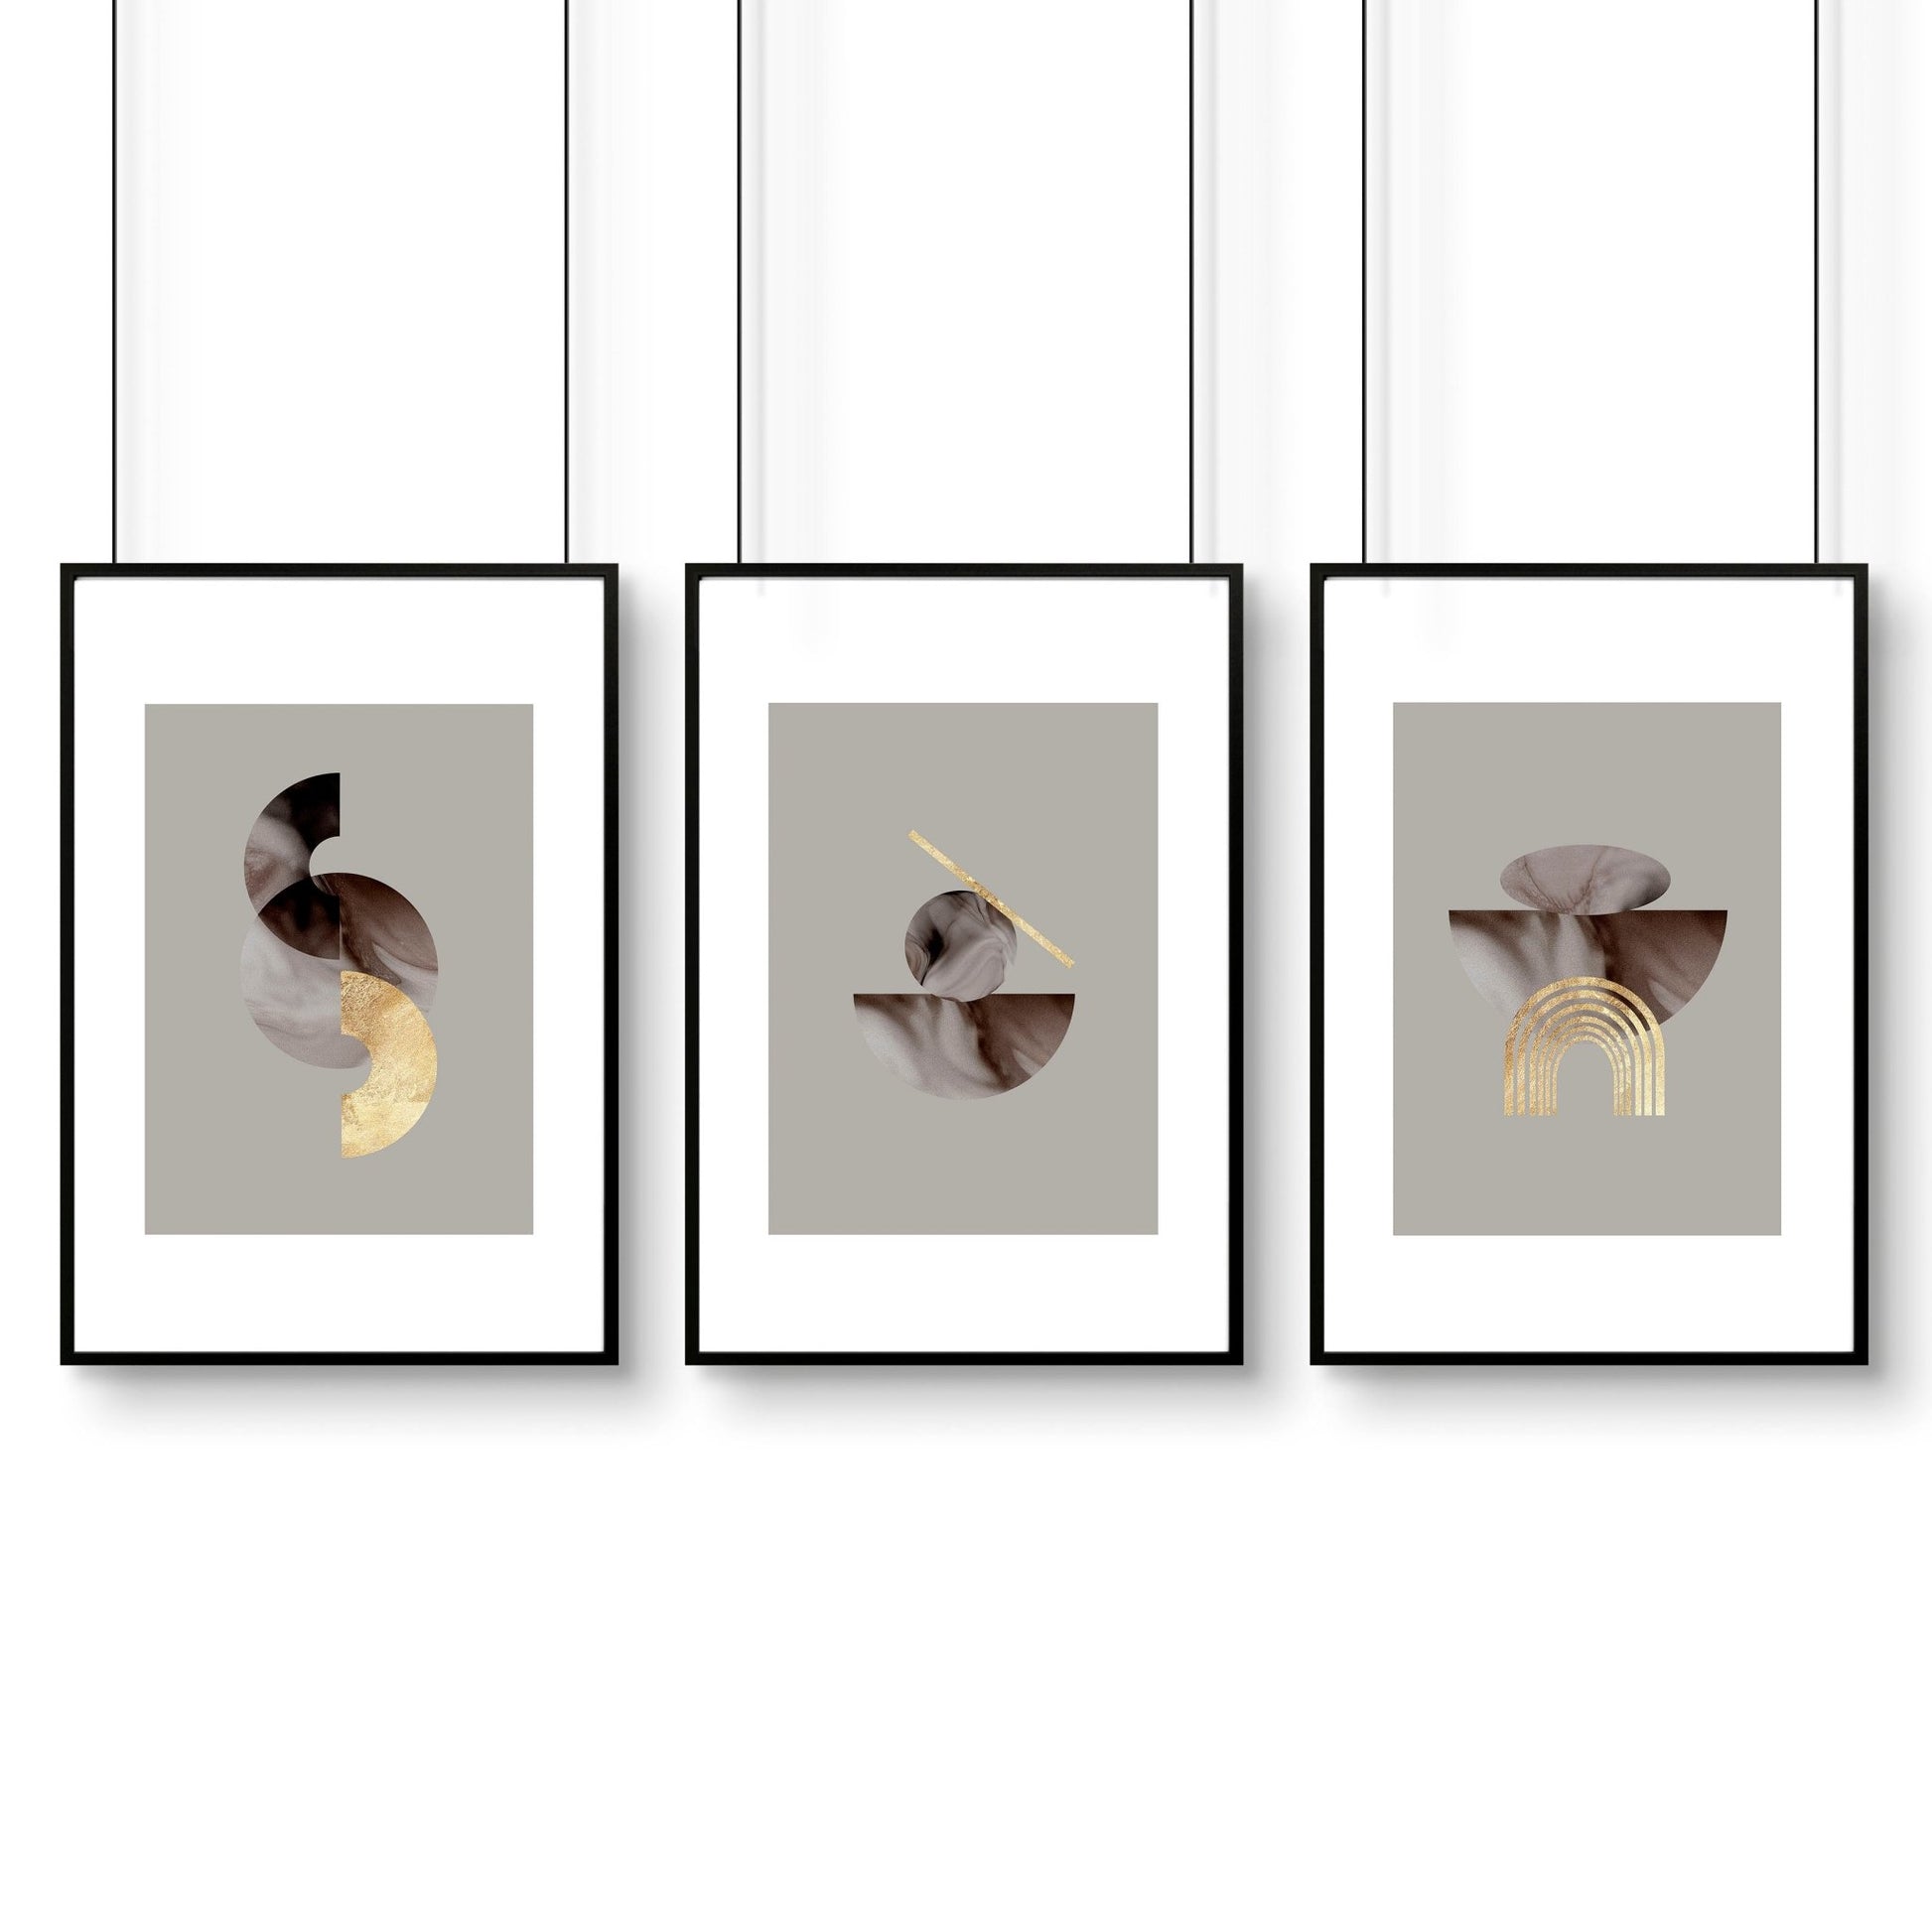 Mid century modern art for office | set of 3 wall art prints - About Wall Art